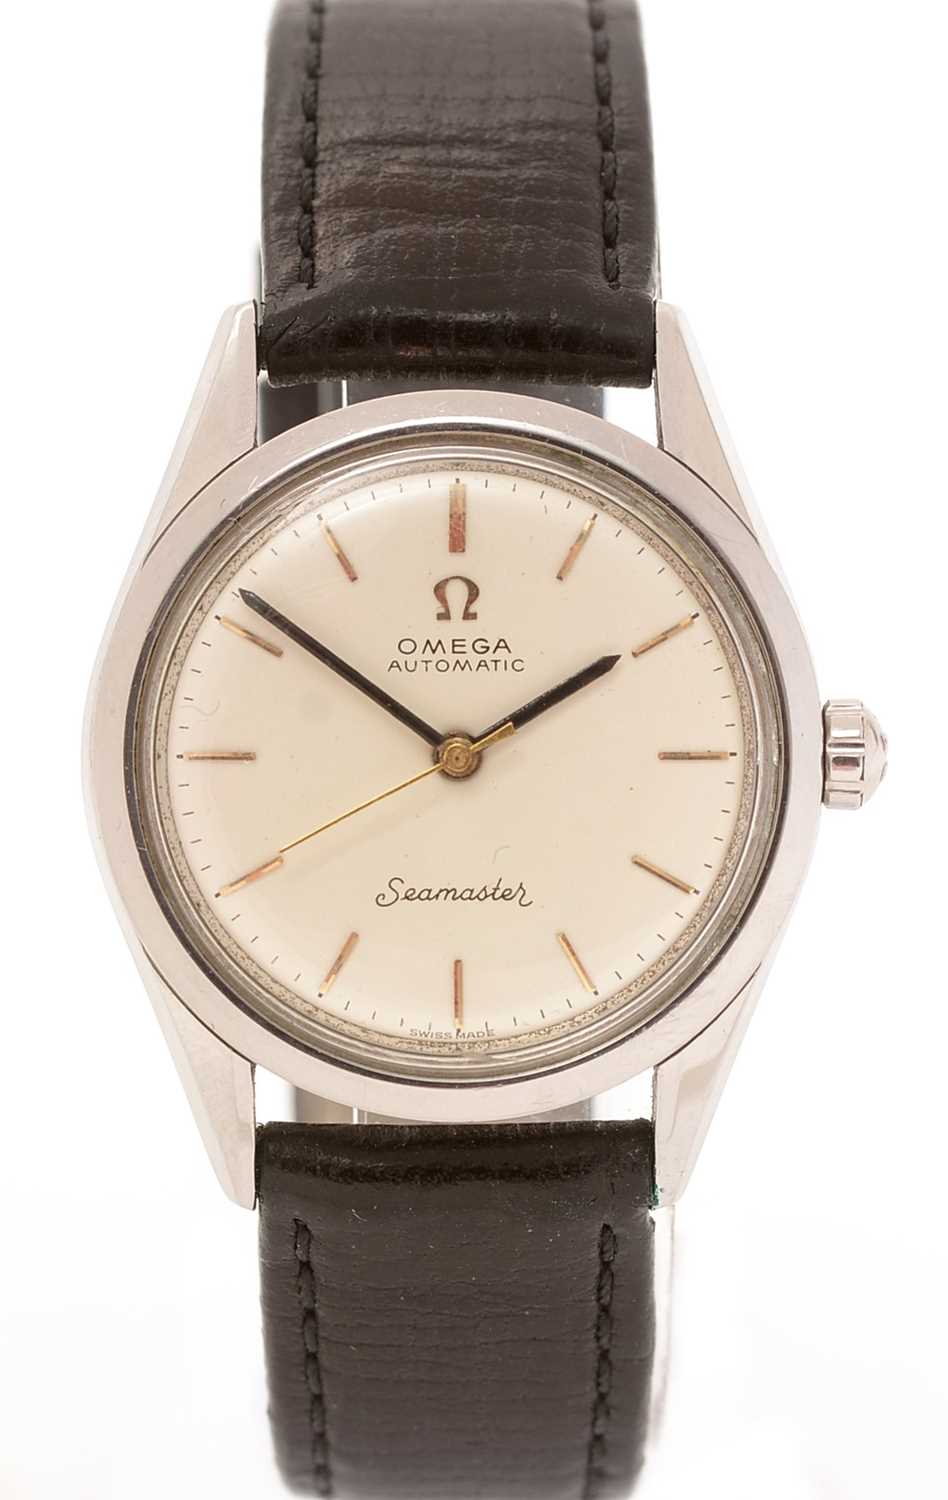 Lot 37 - Omega Seamaster: a stainless steel cased automatic wristwatch